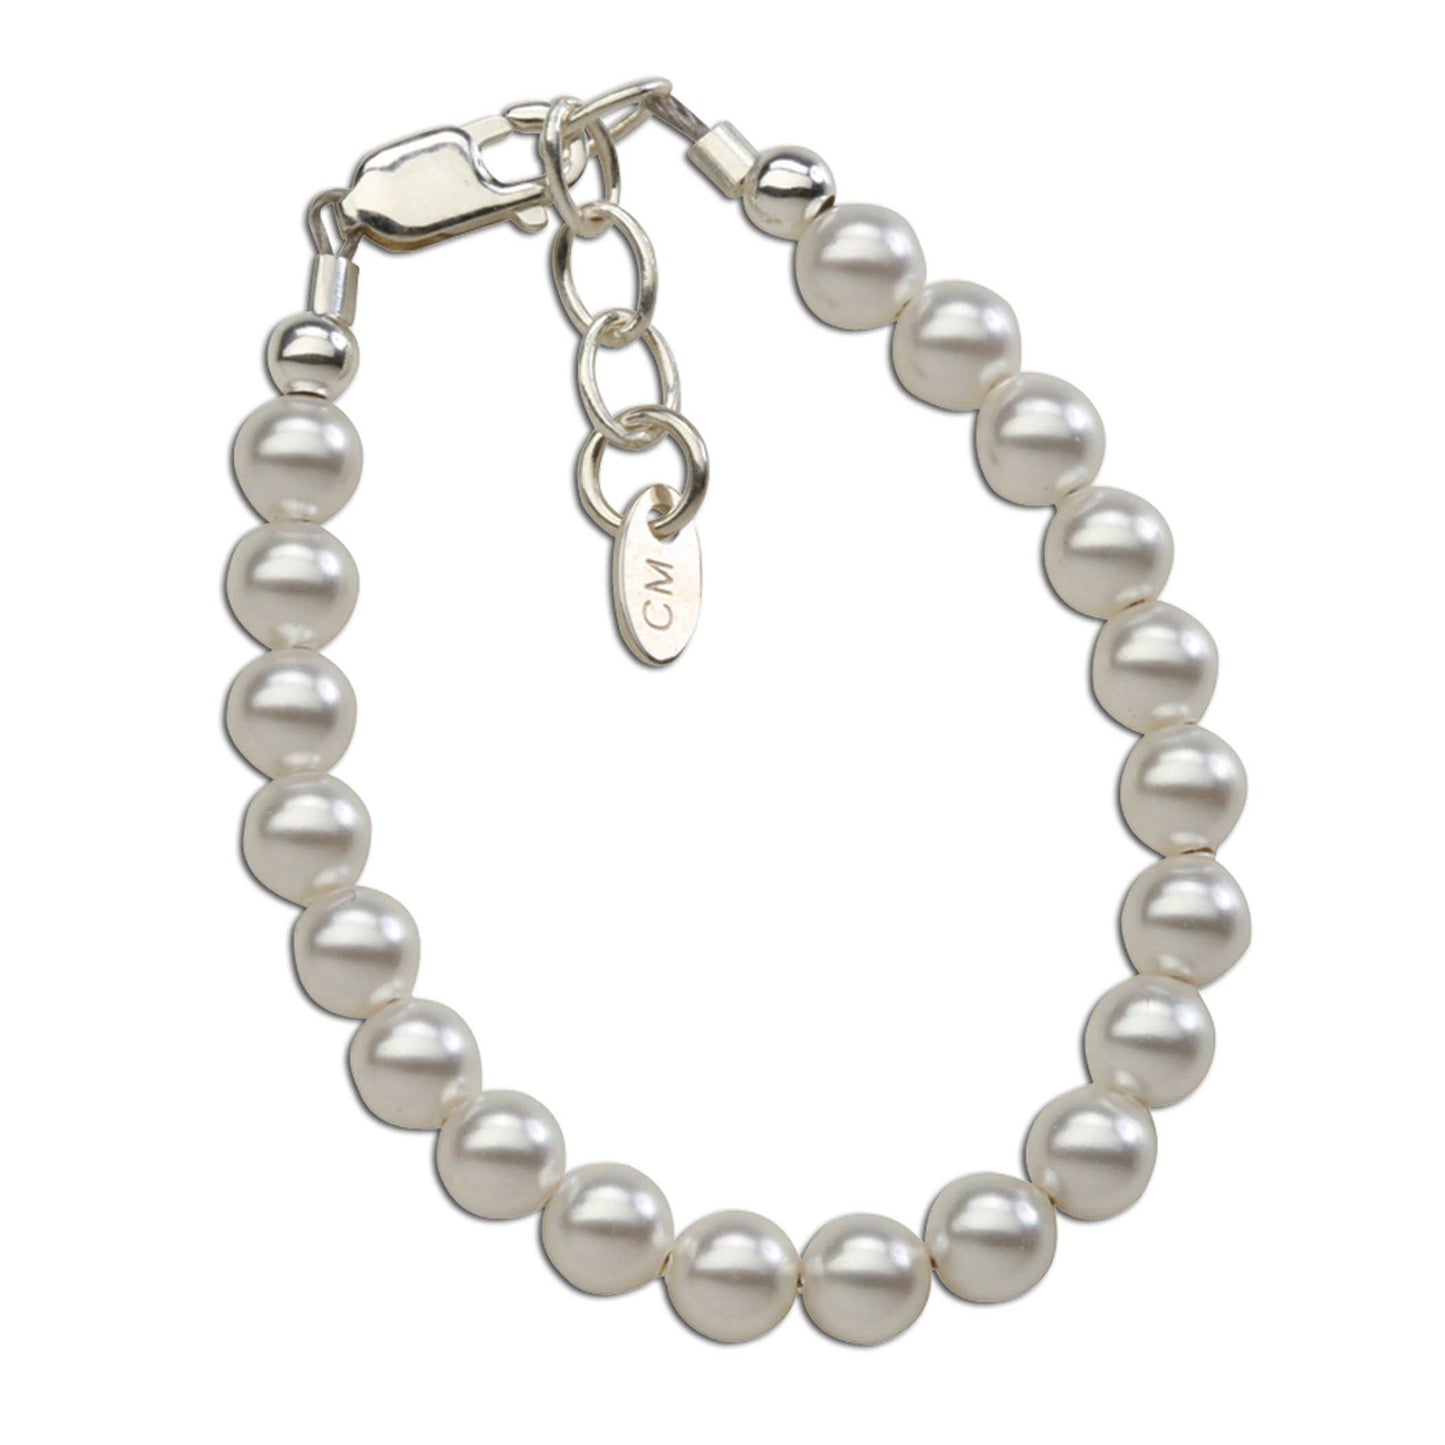 Serenity (1-5Years) - Sterling Silver Pearl Baby & Children's Bracelet Kids Jewelry Cherished Moments   